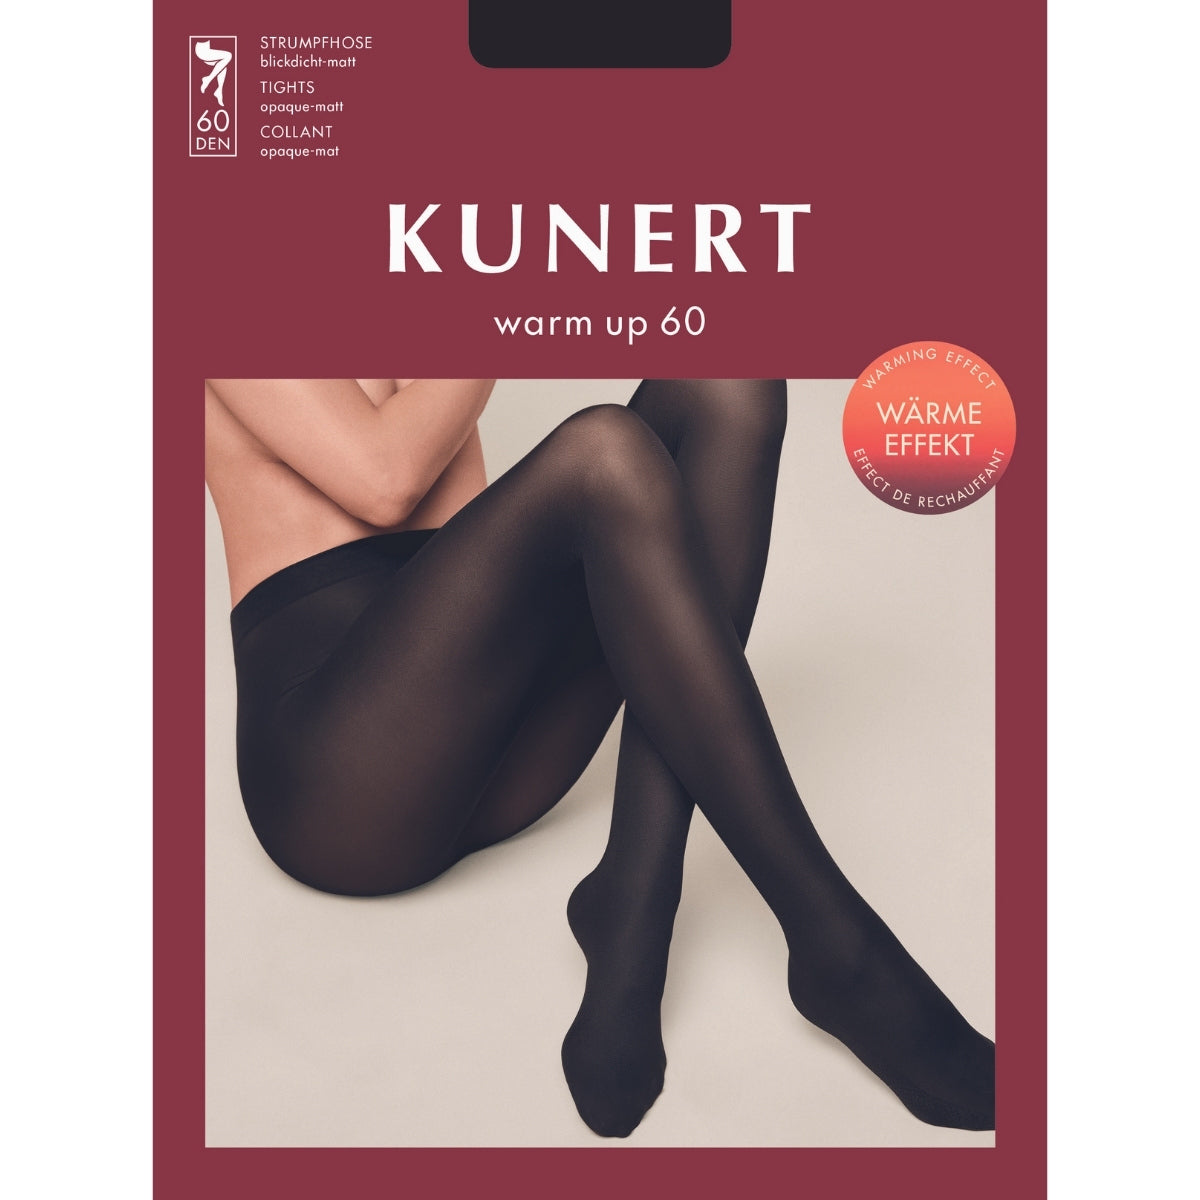 OPAQUE PLUS SIZE TIGHTS - 60 DEN